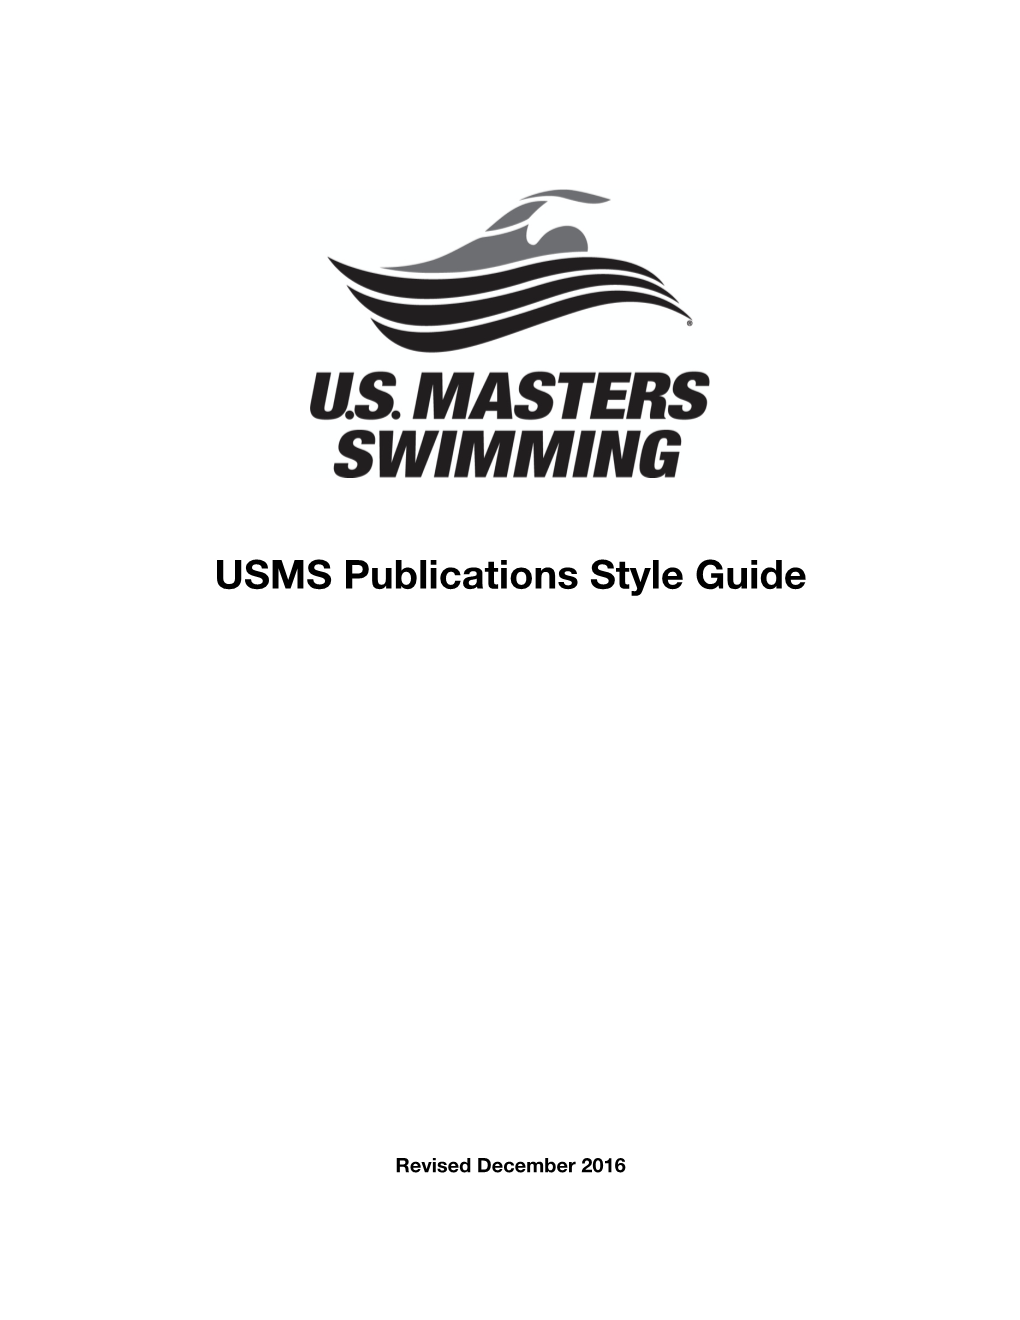 USMS Publications Style Guide